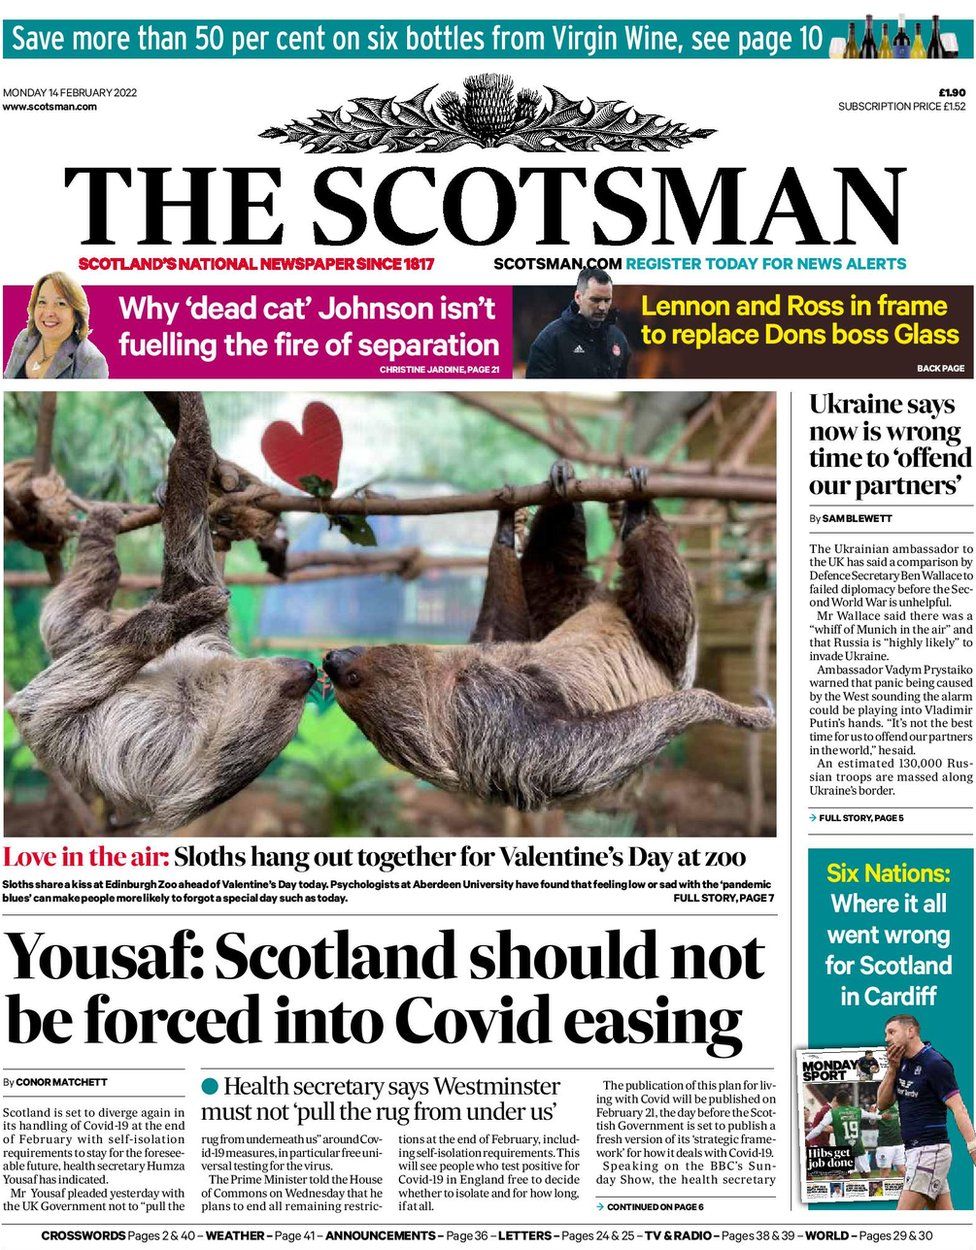 Scotland S Papers Split Over Covid Plans And Ukraine Invasion Fear c News